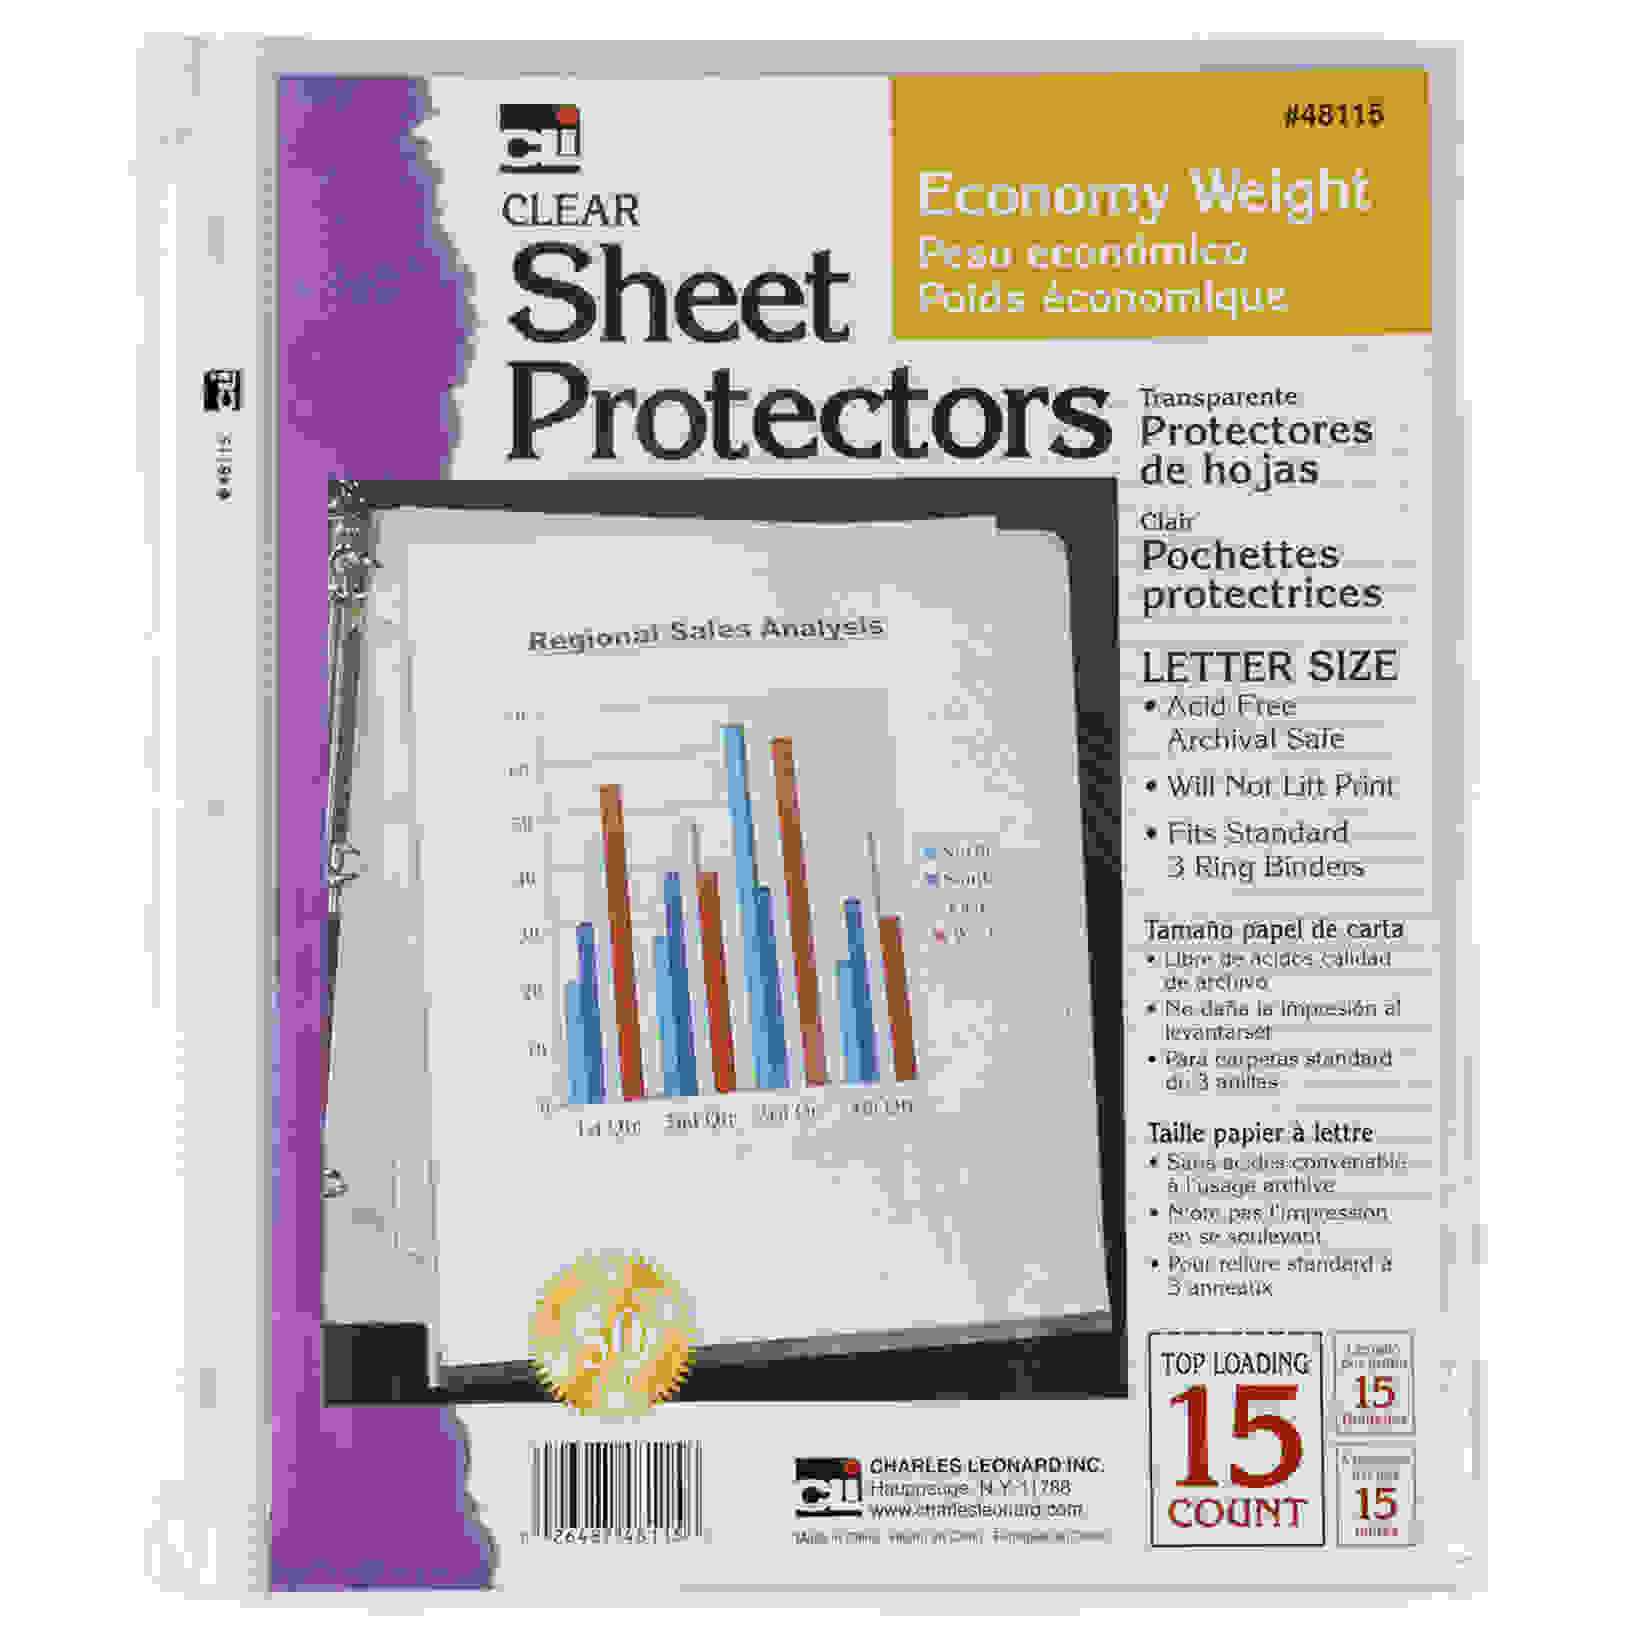 Sheet Protectors, Top Loading with Binder Holes, 2 Mils Economy Weight, Letter Size,Pack of 15